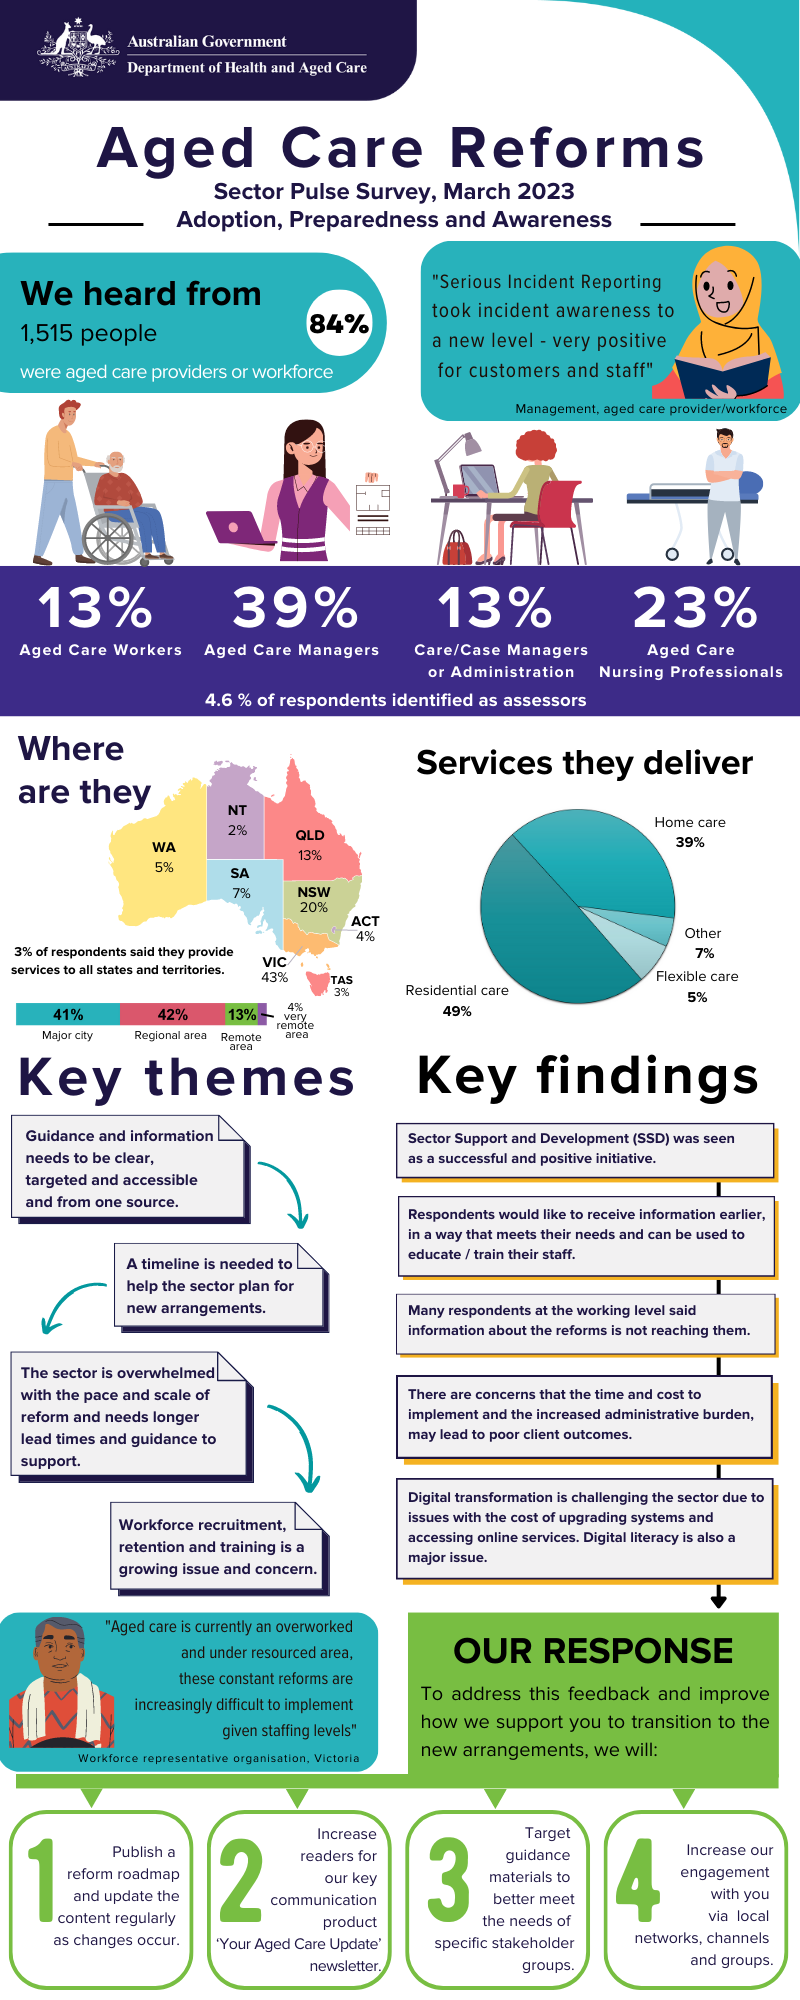 First section text description we heard from 1,515 people, breaking down the percentages of who we hear from. Second section text description where they are located, key themes, image of map of Australia. Showing percentages in each state. Third section text description services they deliver and key findings. A pie chart shows percentages and the split between services they deliver. Fourth section text description describes the findings and the department’s response to the next 4 steps.